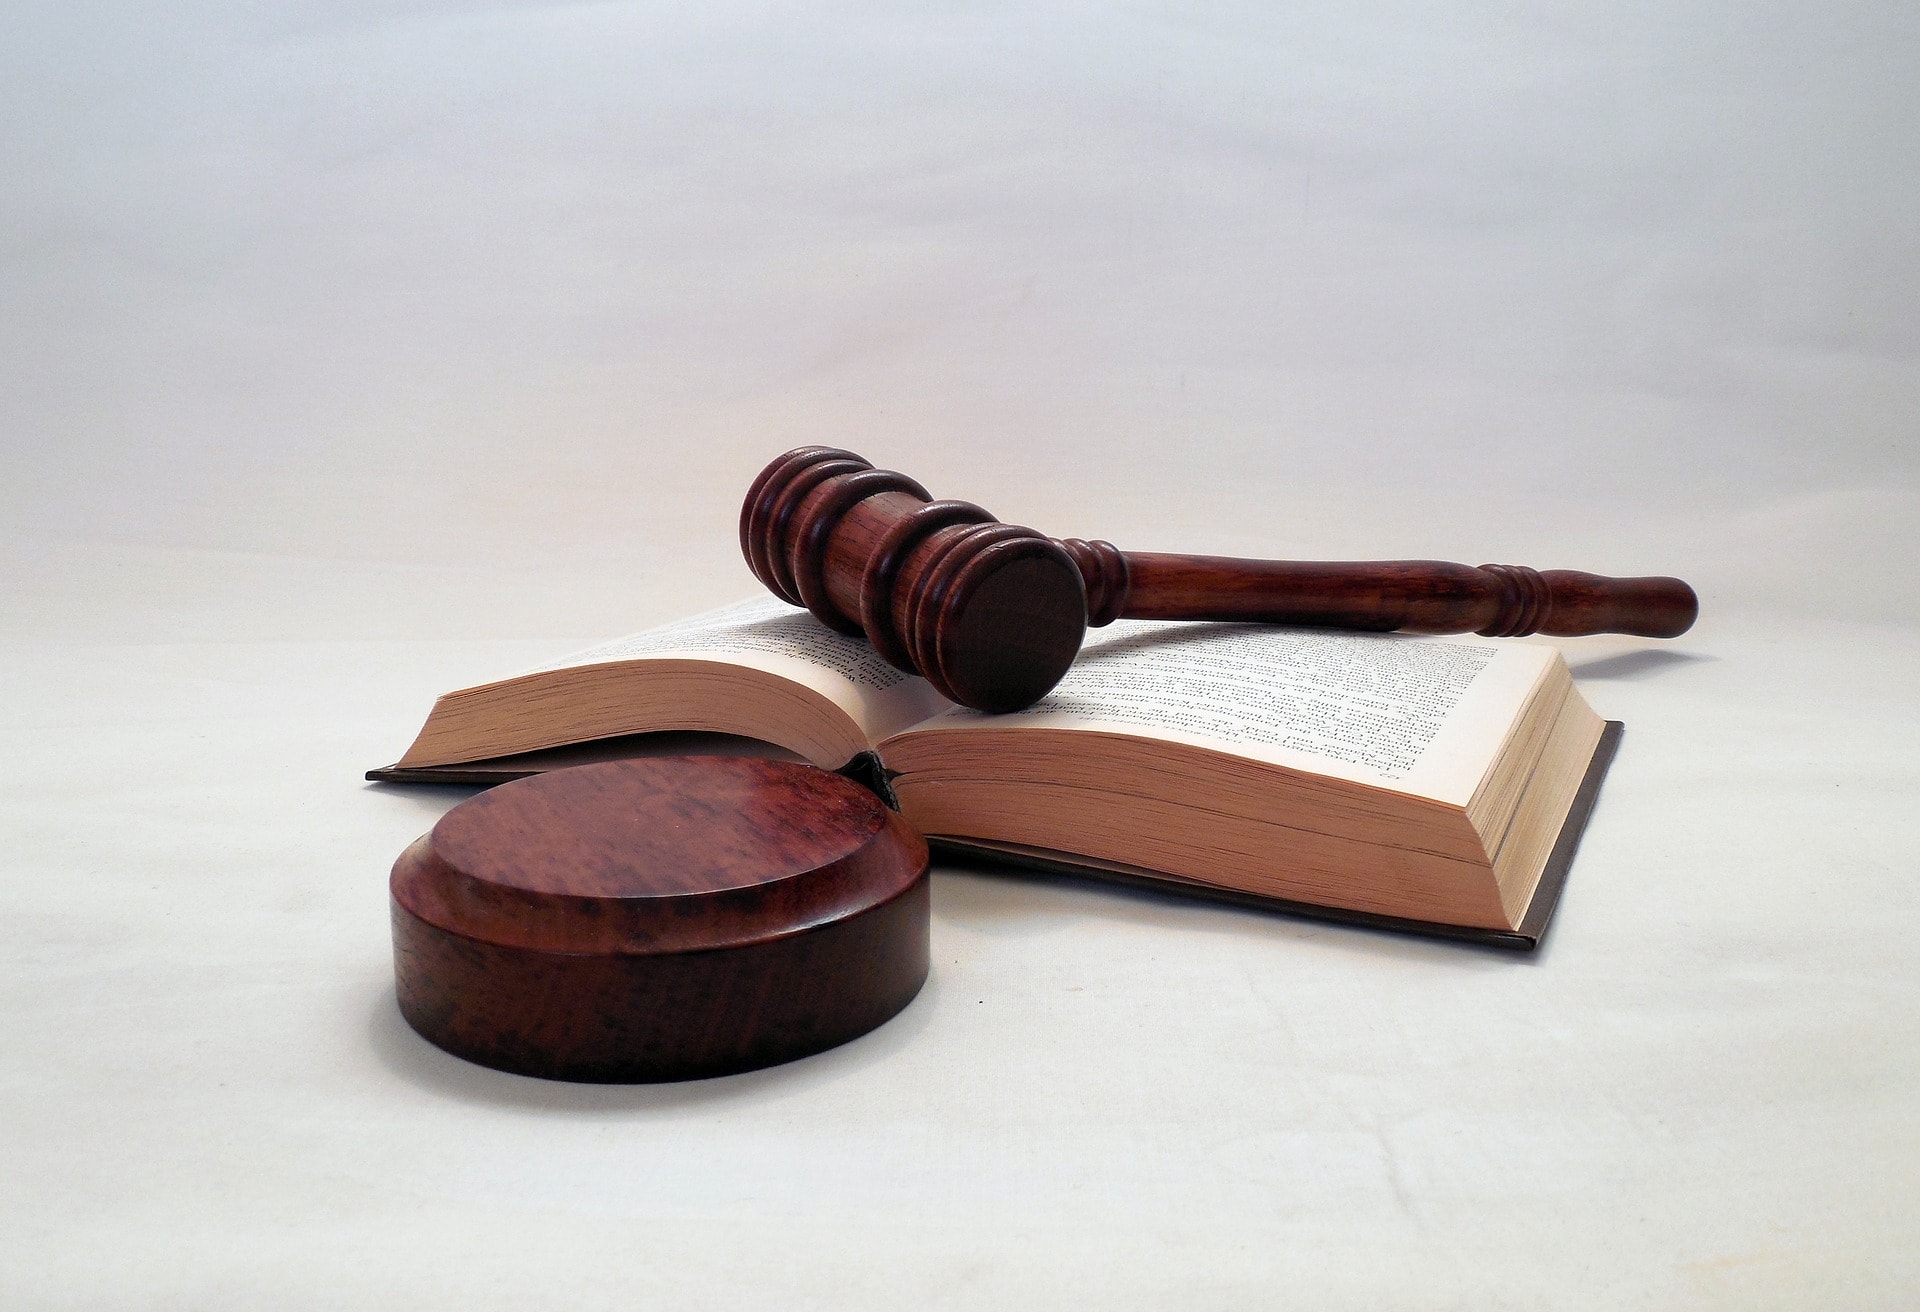 A judge's gavel and block with the gavel resting on an open book.